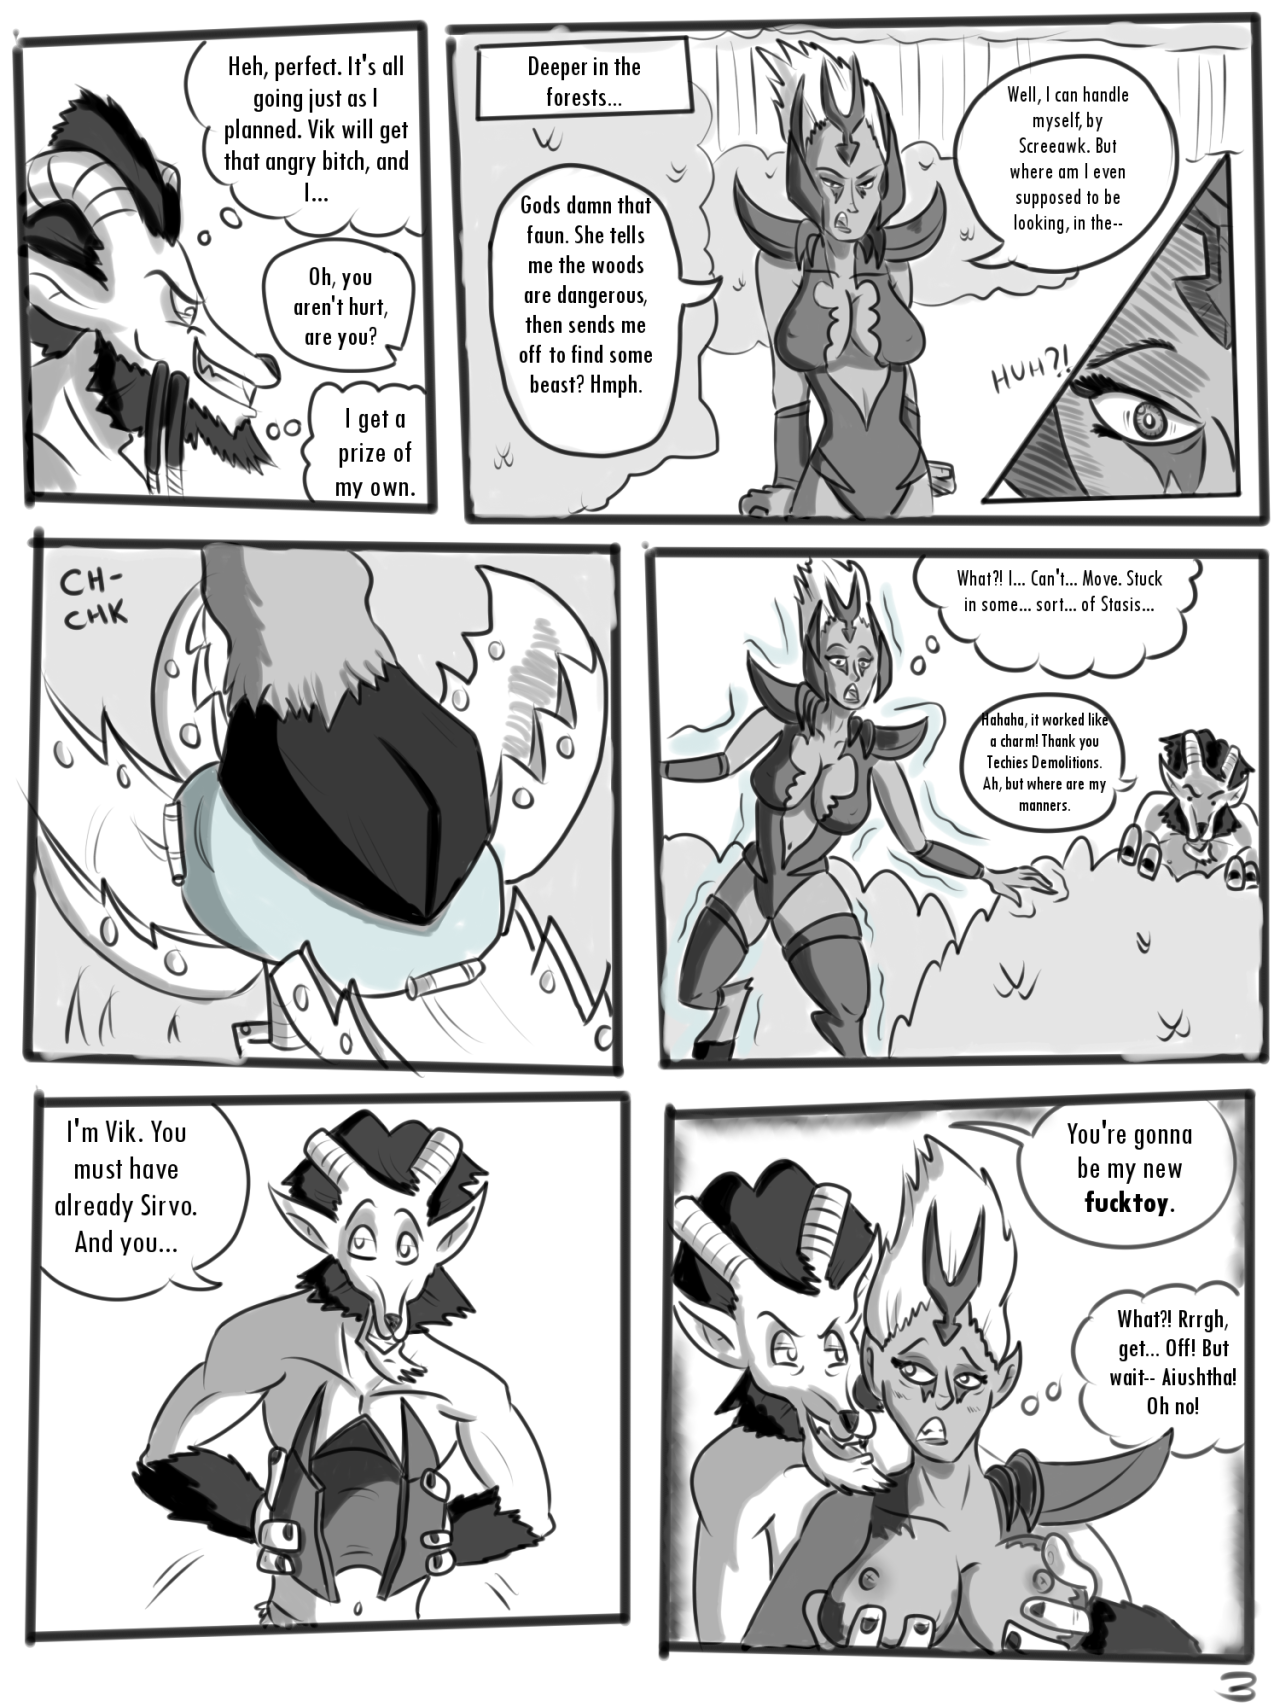 Page 3 of Two Horny Satyrs in Jungle Fever is here boys and girls. And look! There’s